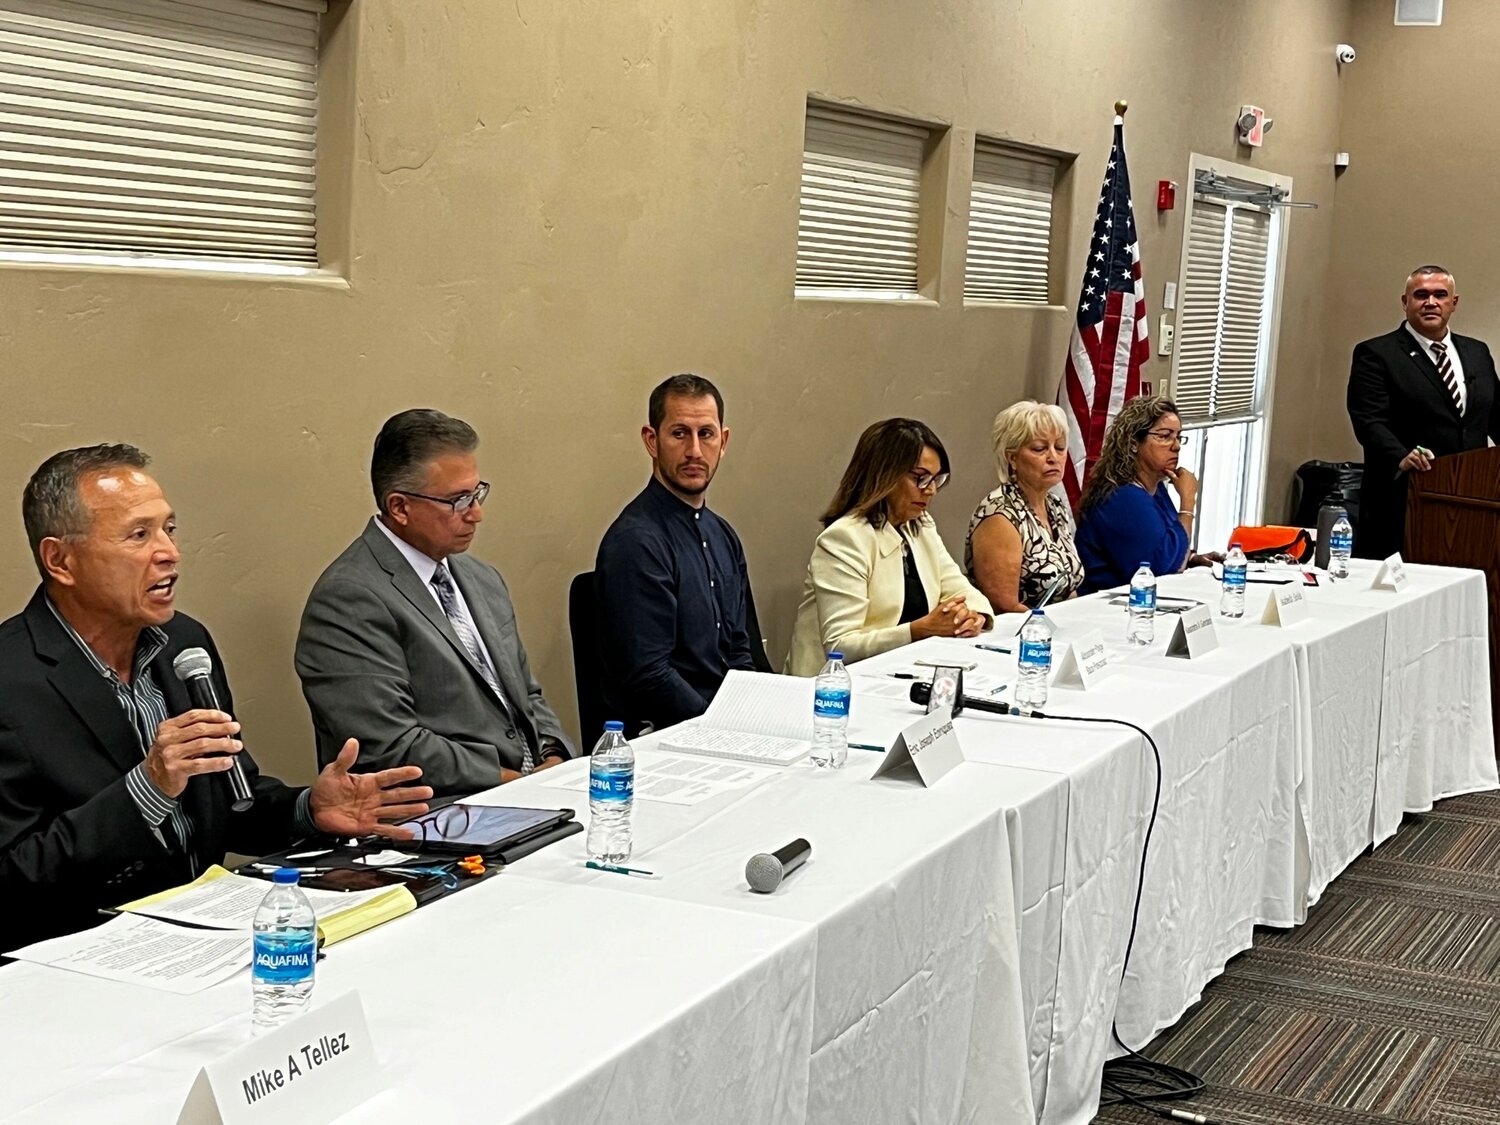 Candidates discuss construction, home building issues Las Cruces Bulletin